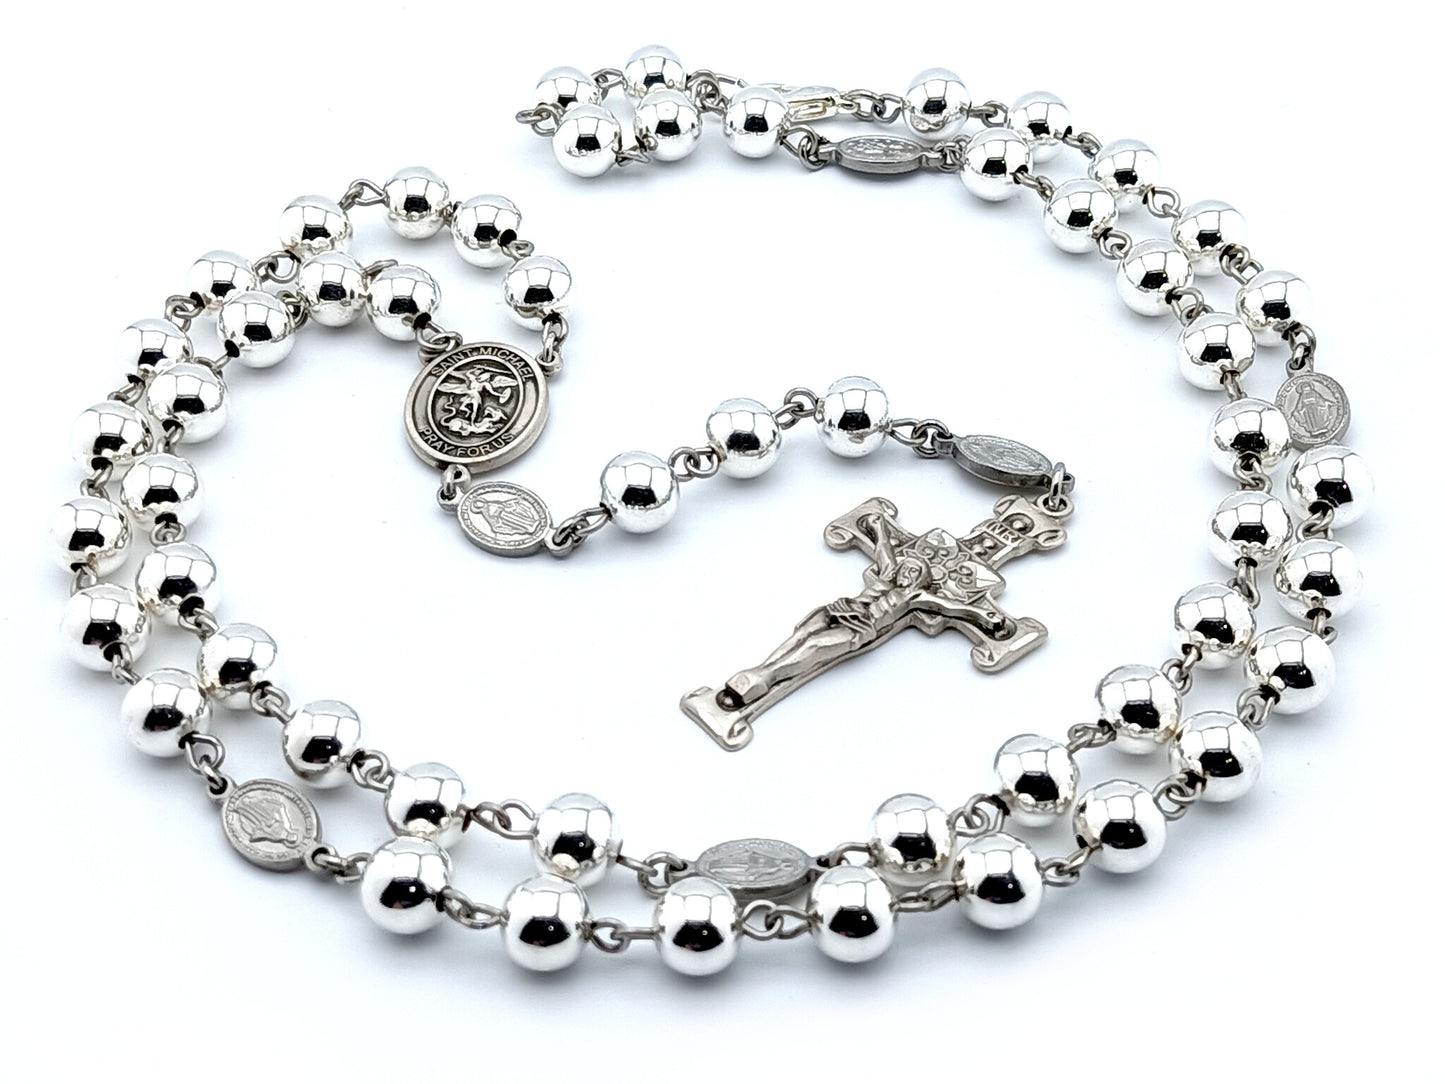 Genuine 925 Sterling silver Saint michael rosary beads, Sterling silver crucifix and St Michael medal with Miraculous medal rosary.